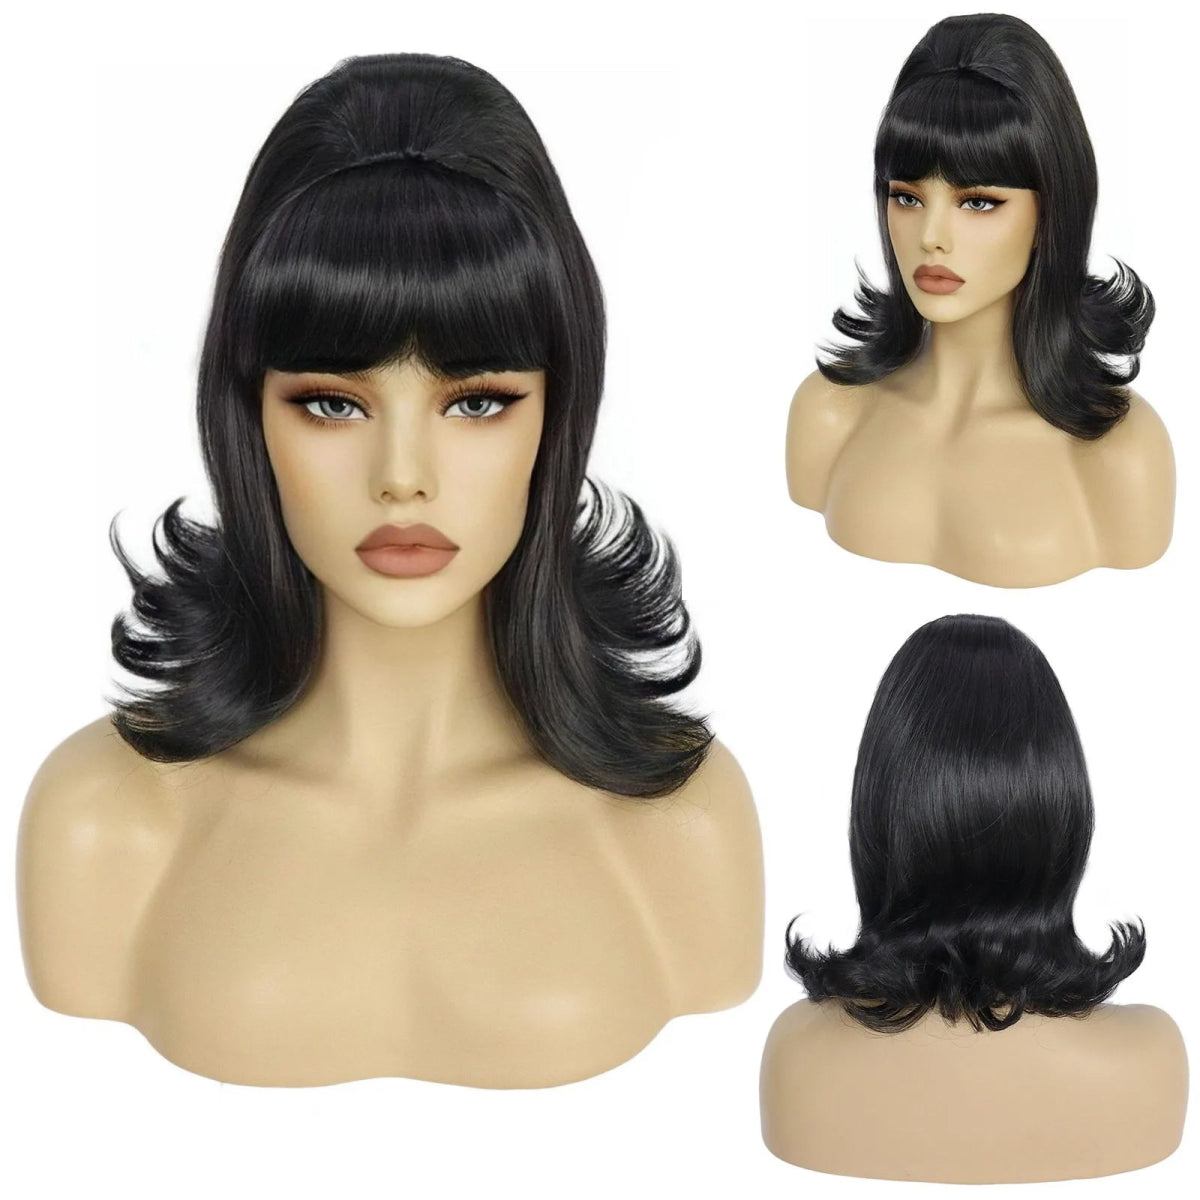 Black Silky Smooth Synthetic Hair Wig - HairNjoy